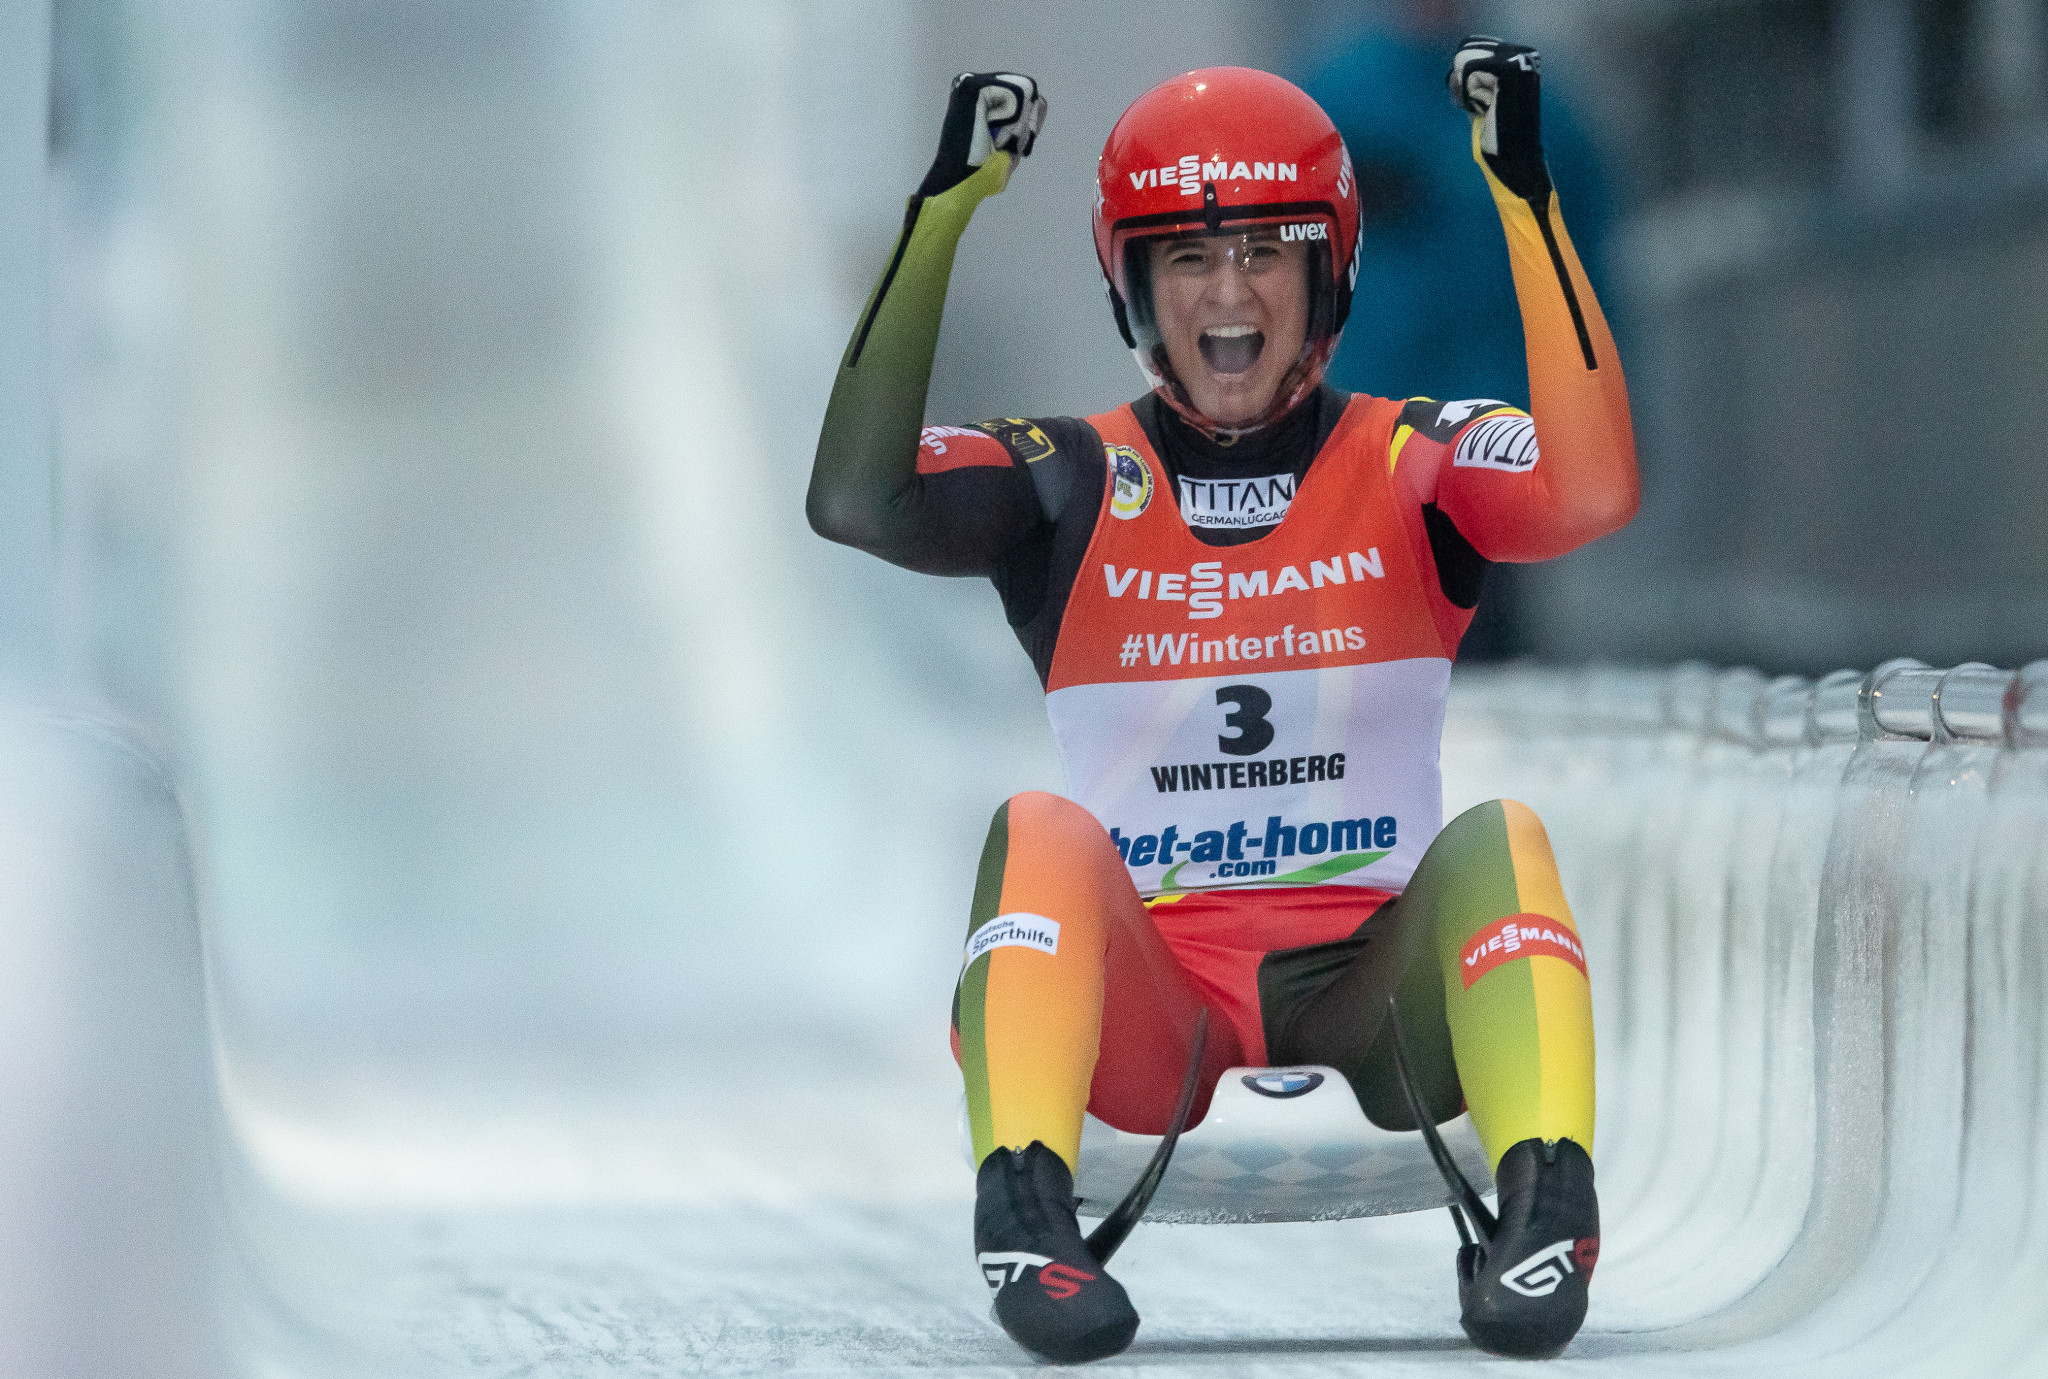 Newly-crowned world champions ready to compete at FIL World Cup event in Altenberg